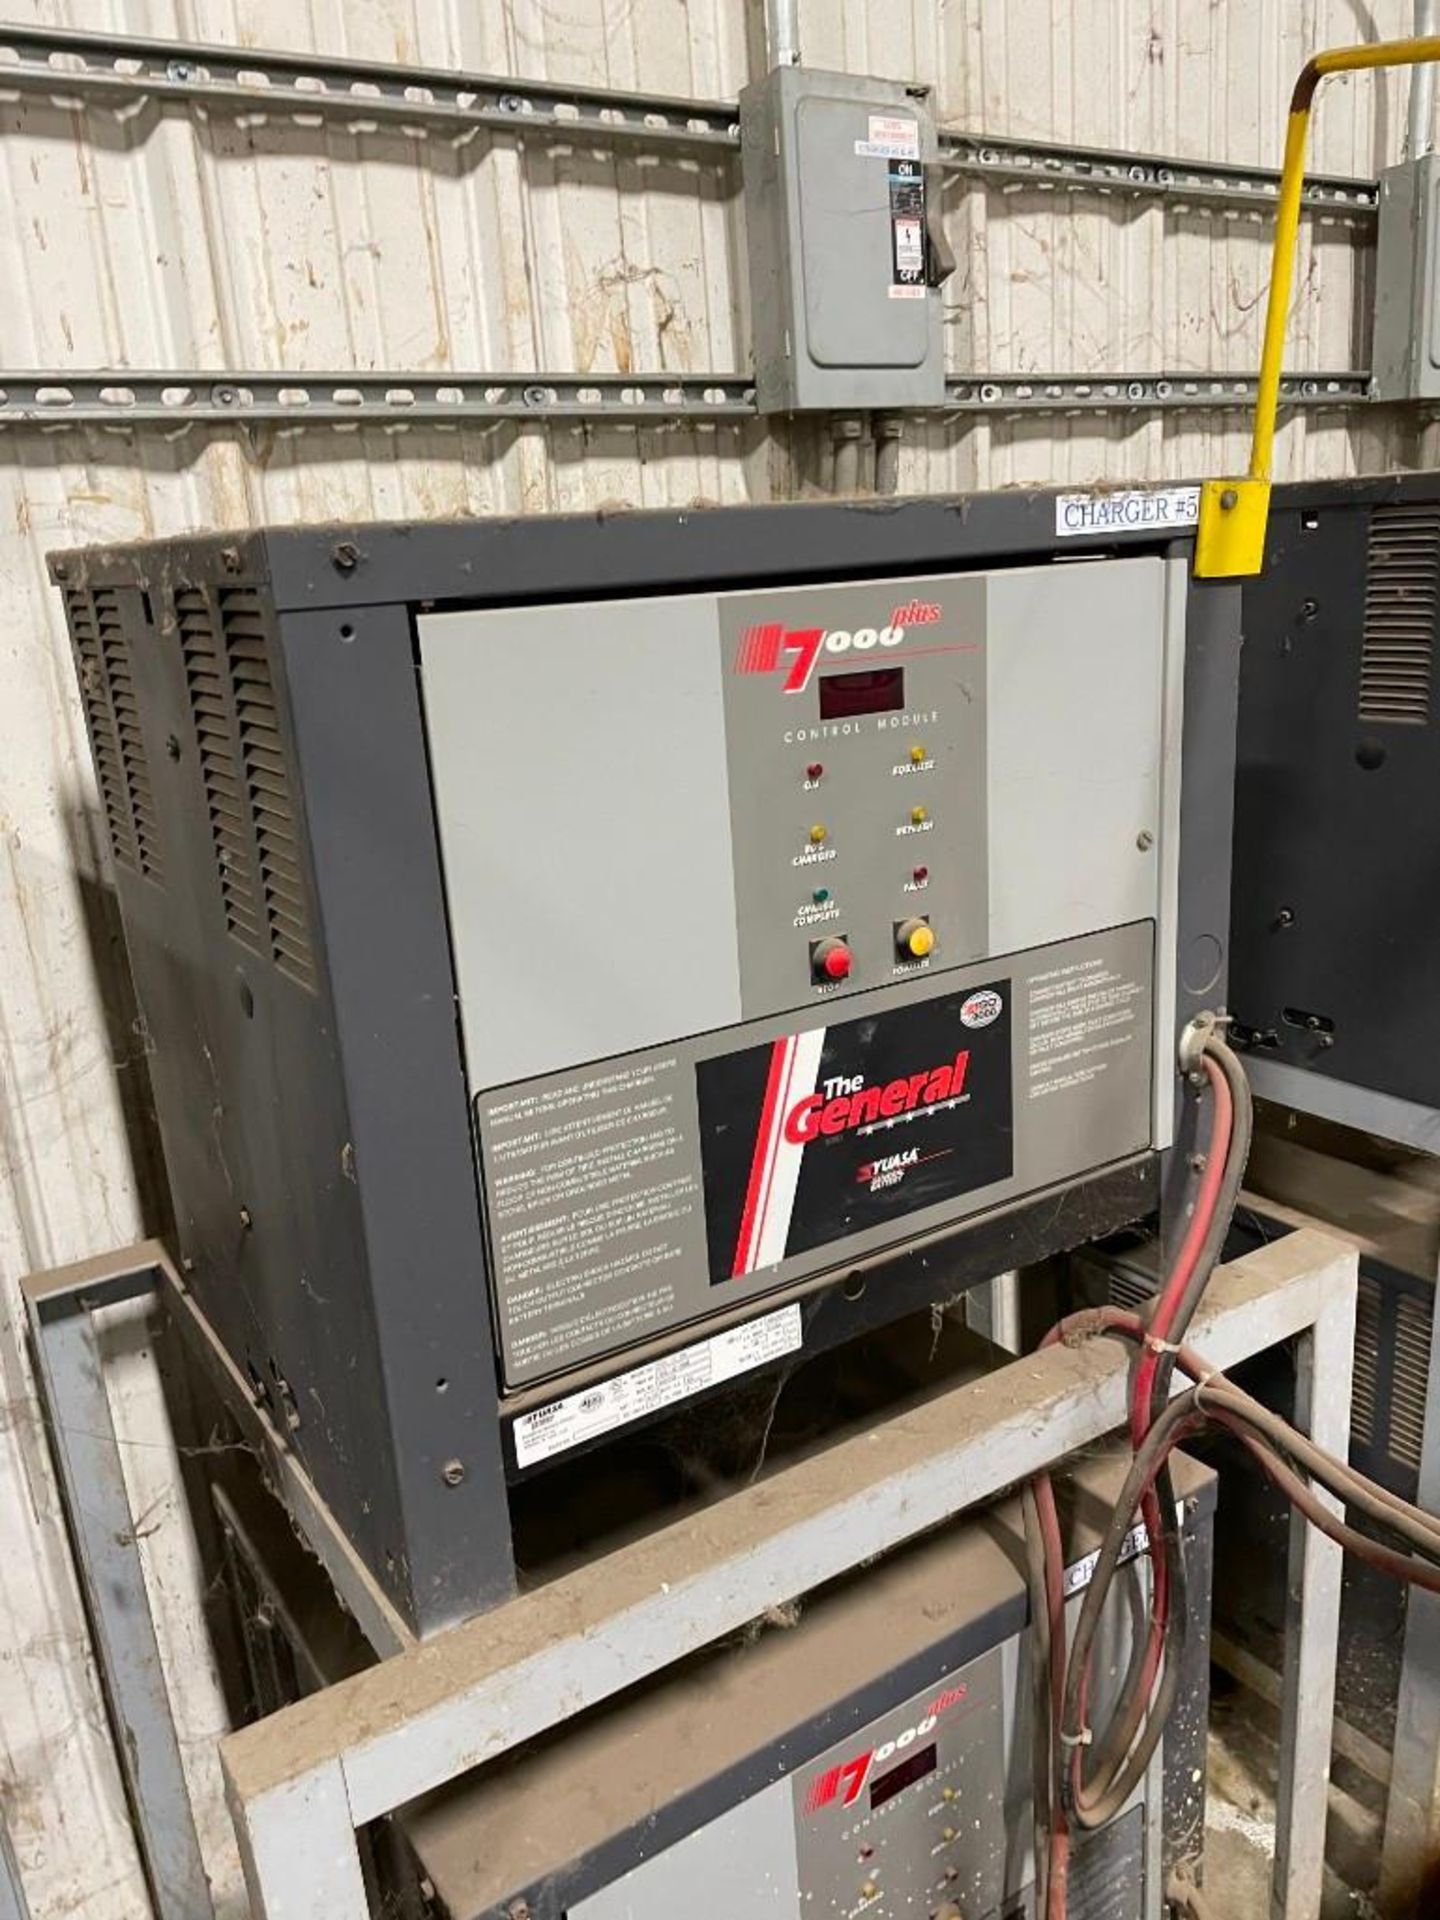 Yuasa General 7000 Plus Industrial Battery Charger - Image 2 of 5